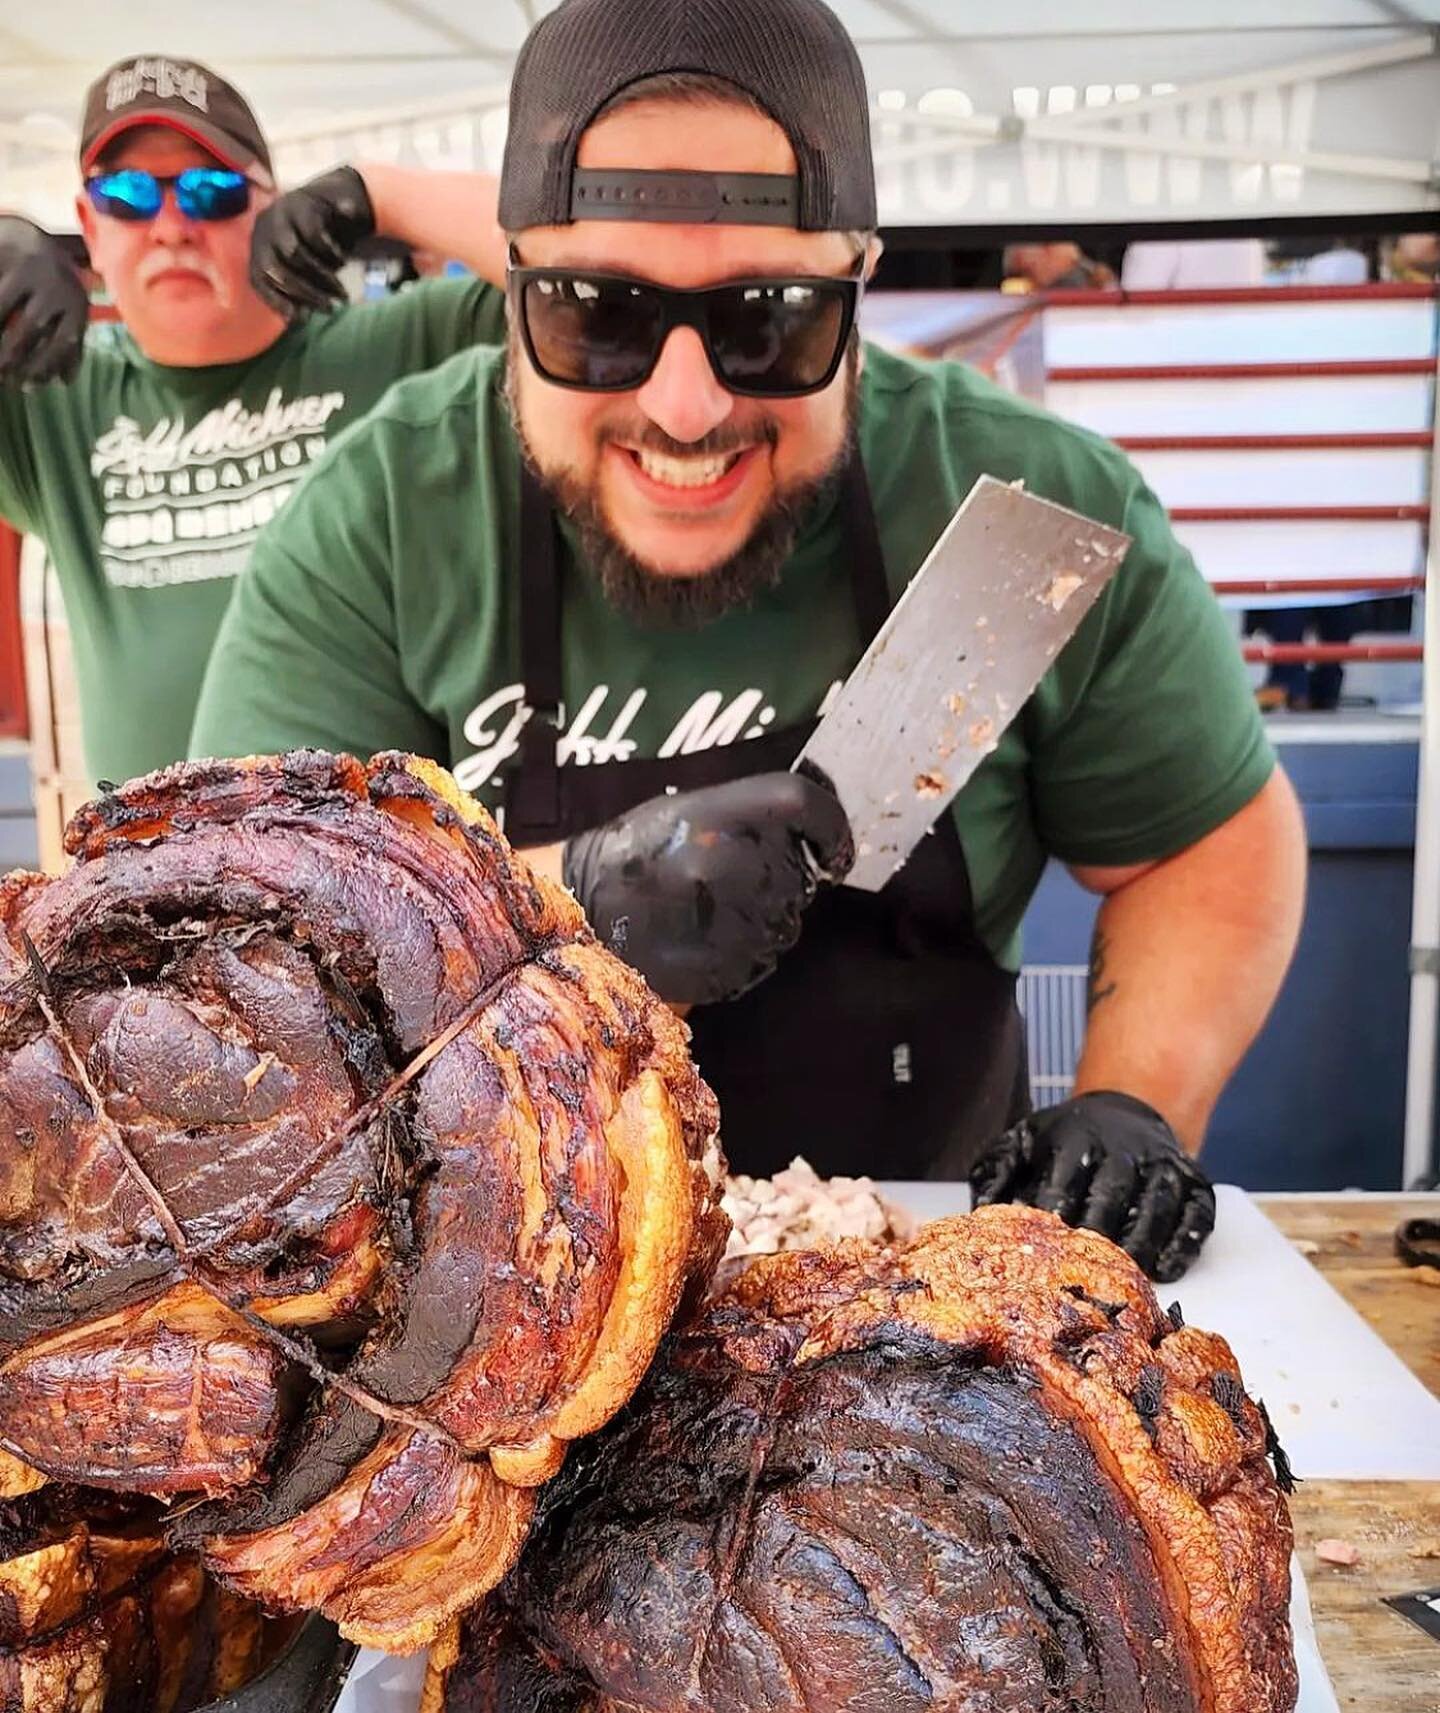 Today&rsquo;s the day! The Porchetta King @mind_machine will be at Mamaroneck from 5-8pm for an incredible pop up. Menu
⬇️⬇️⬇️⬇️⬇️⬇️⬇️⬇️⬇️⬇️

&bull;Wood-fired Pizza 
Smoked Porchetta and potato puff pizza. Provolone. Fresh herbs 

&bull;Hot dog with 